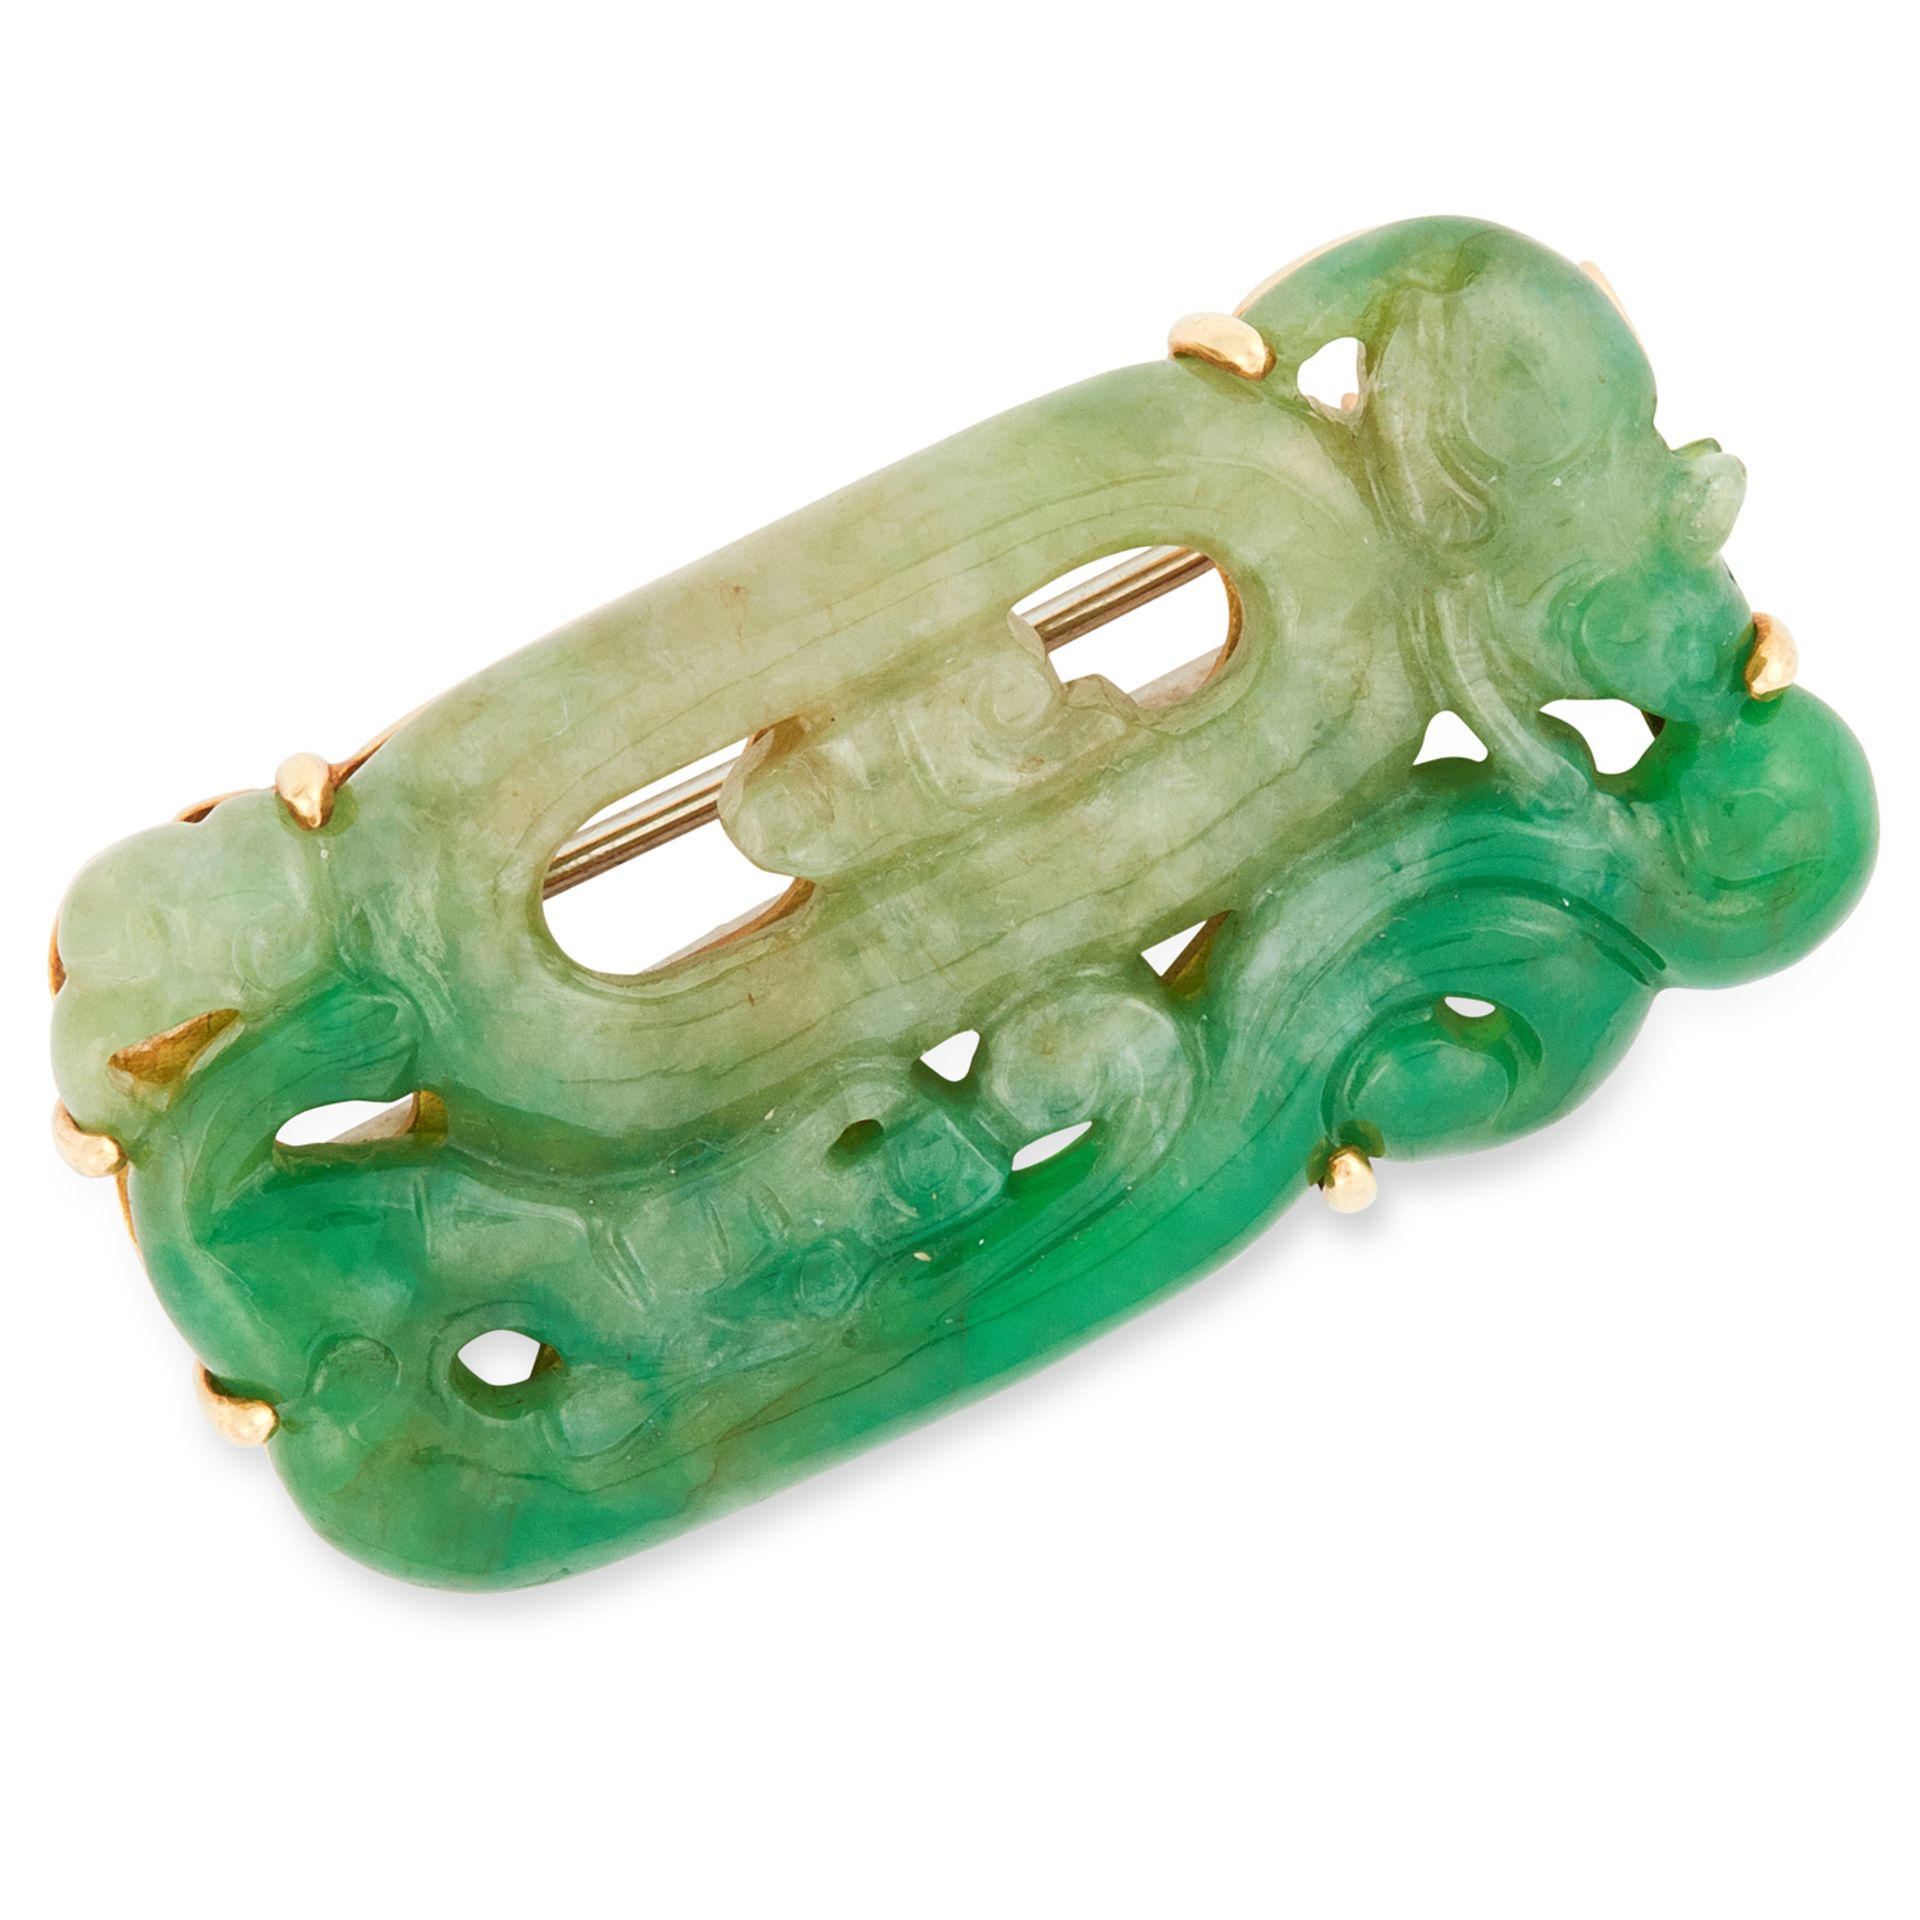 A CARVED CHINESE JADEITE JADE BROOCH formed of a carved piece of jadeite depicting oriental